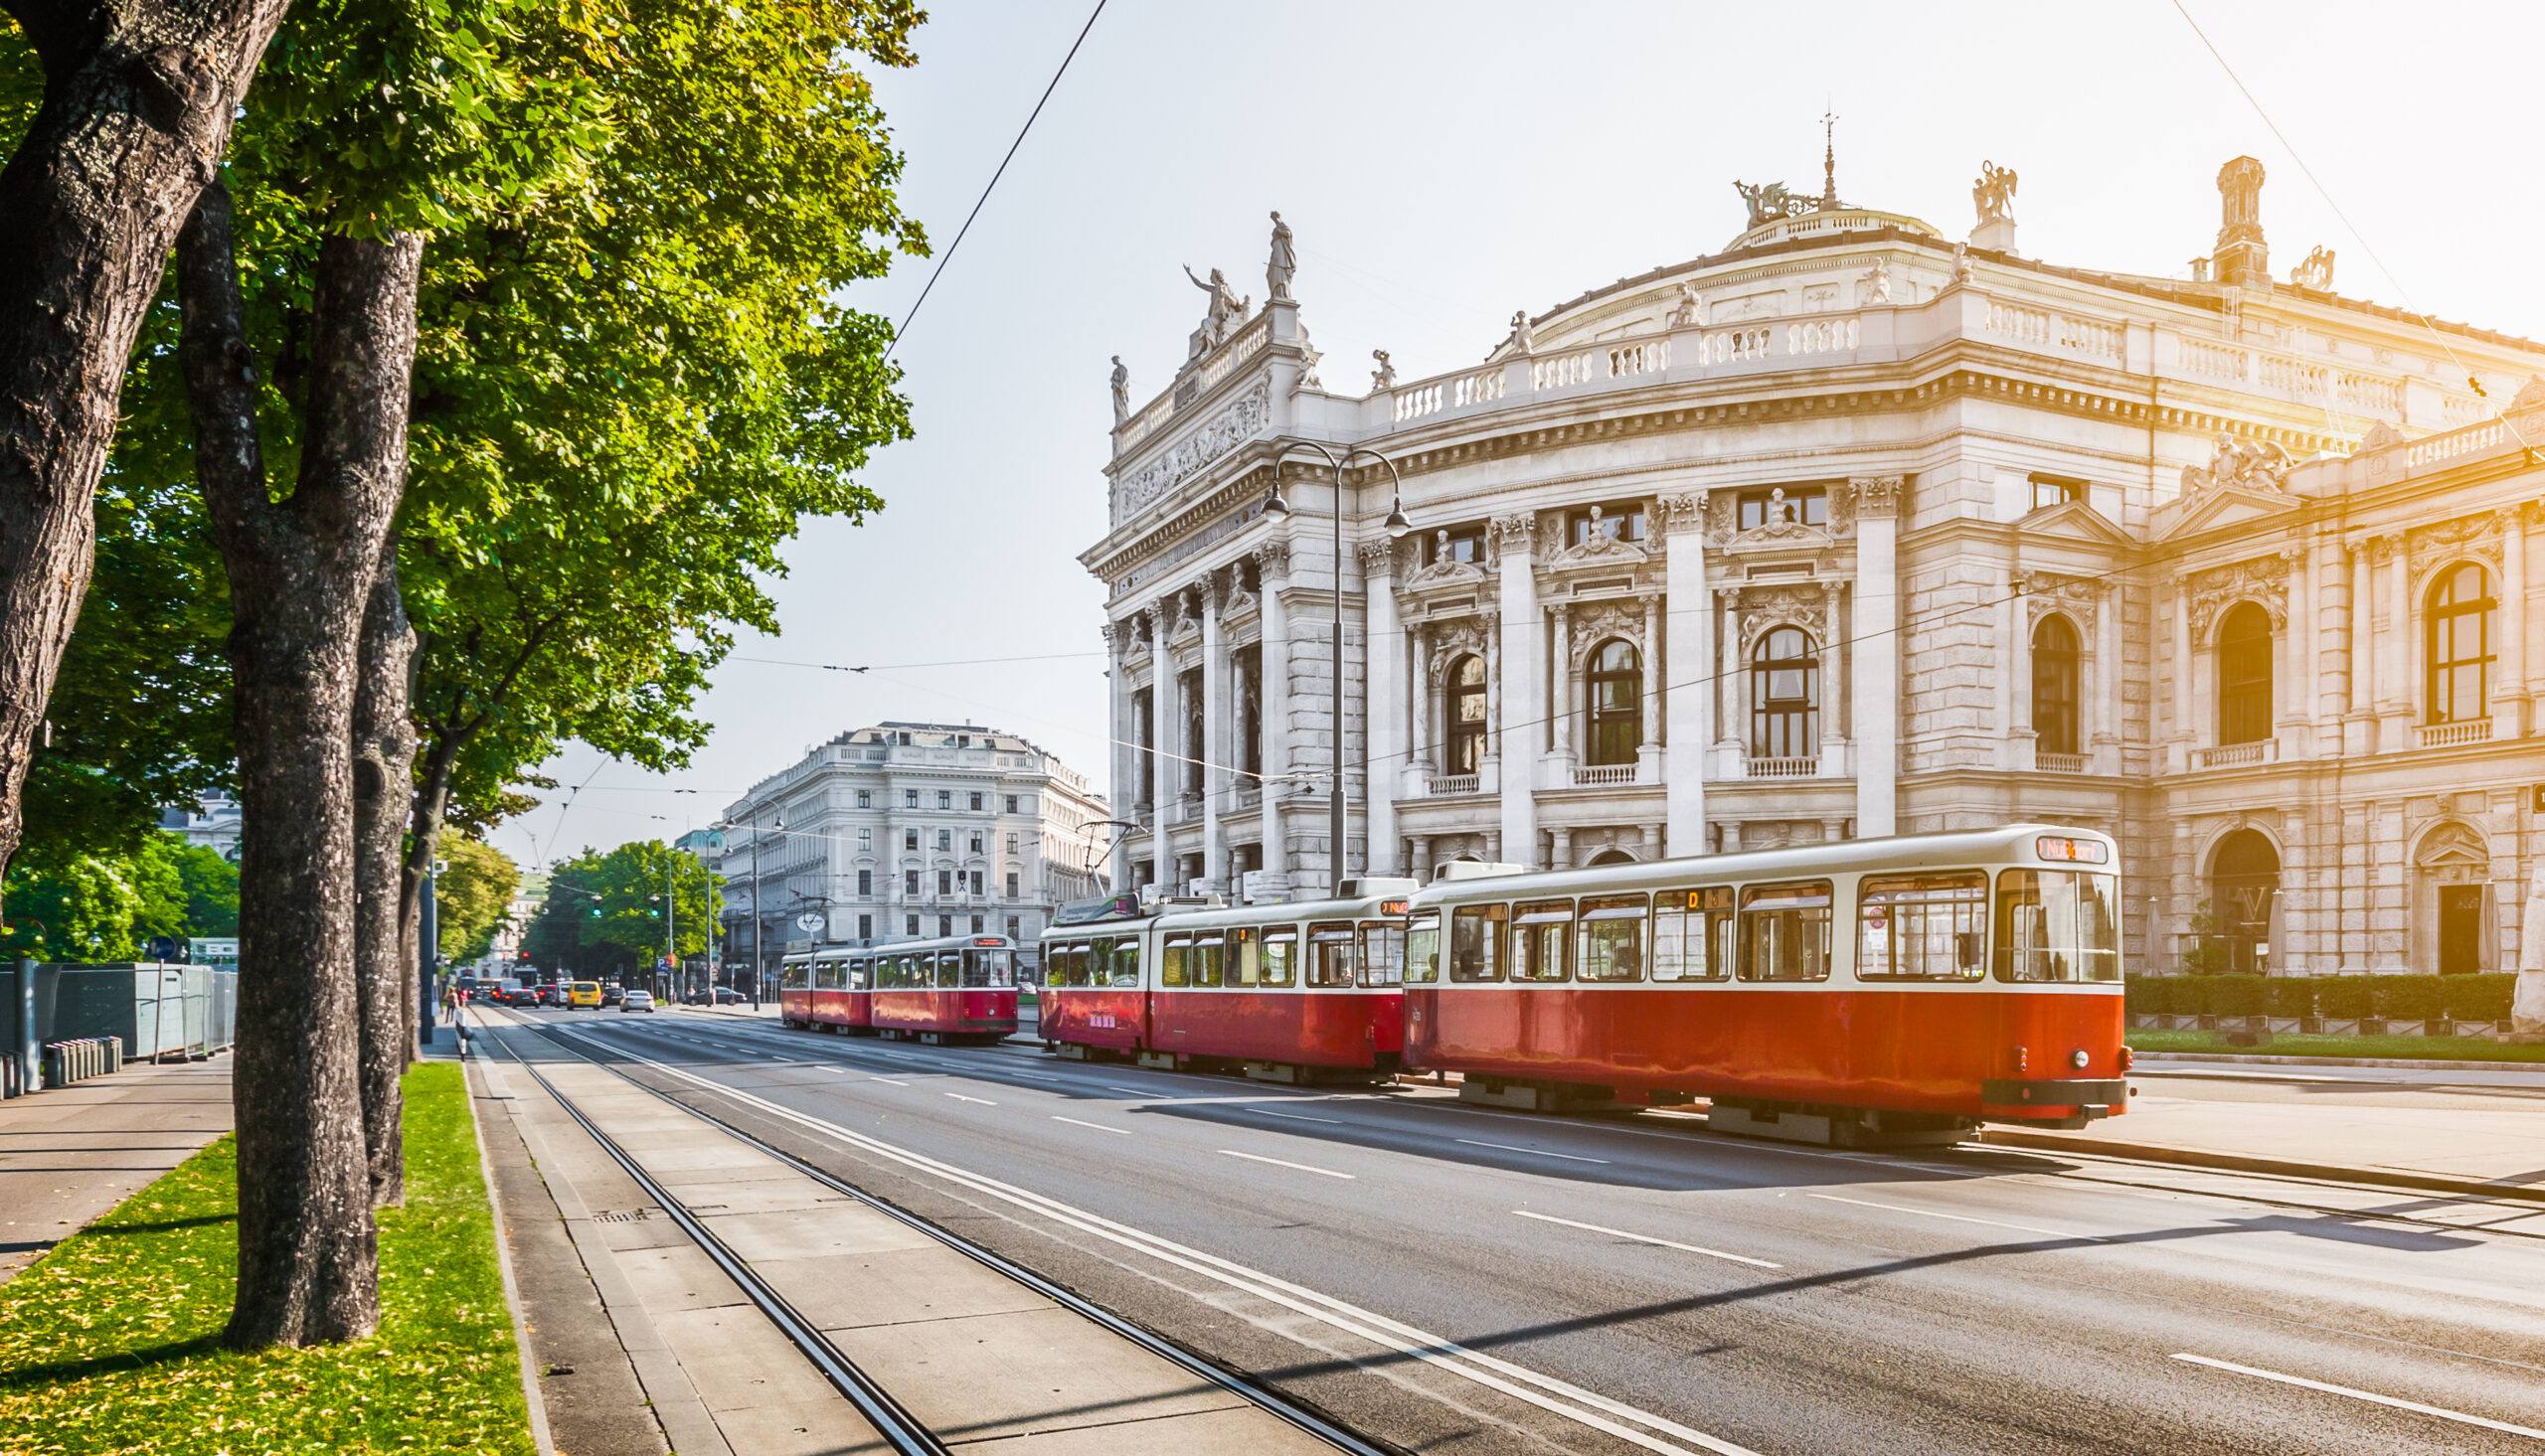 Street view with red traditional tram and historical buildings in the background.